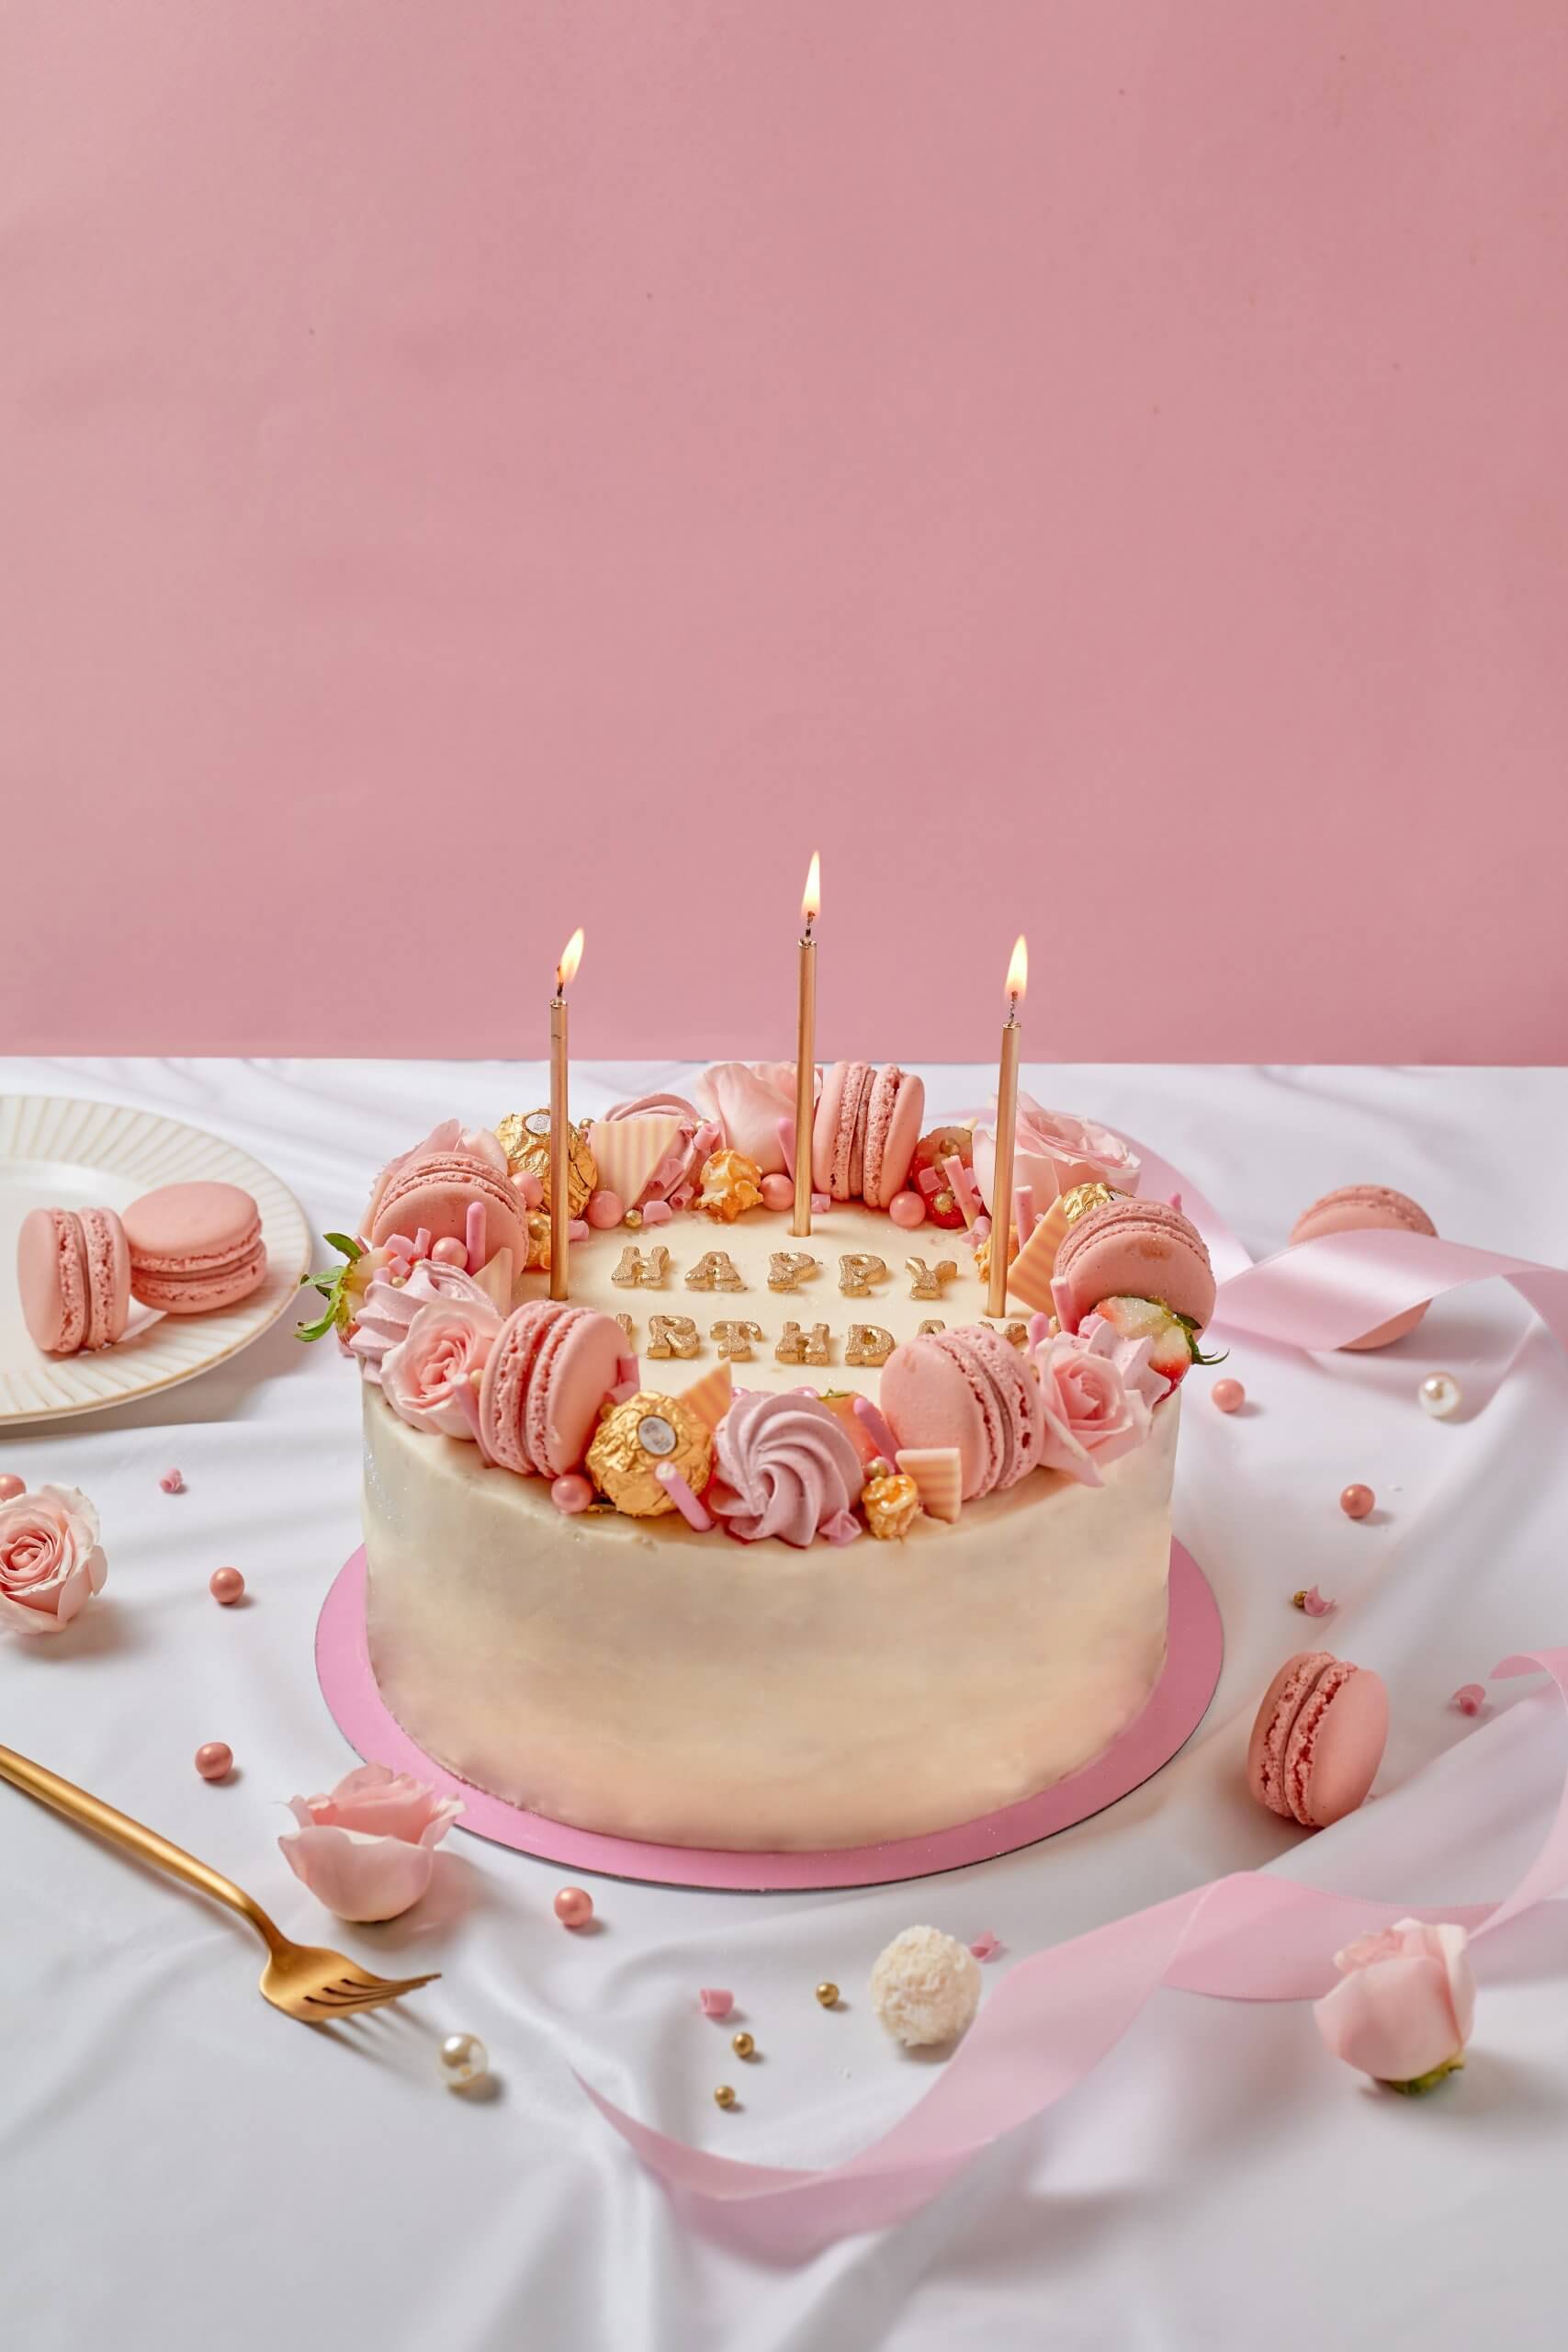 happy birthday cake pink with candles